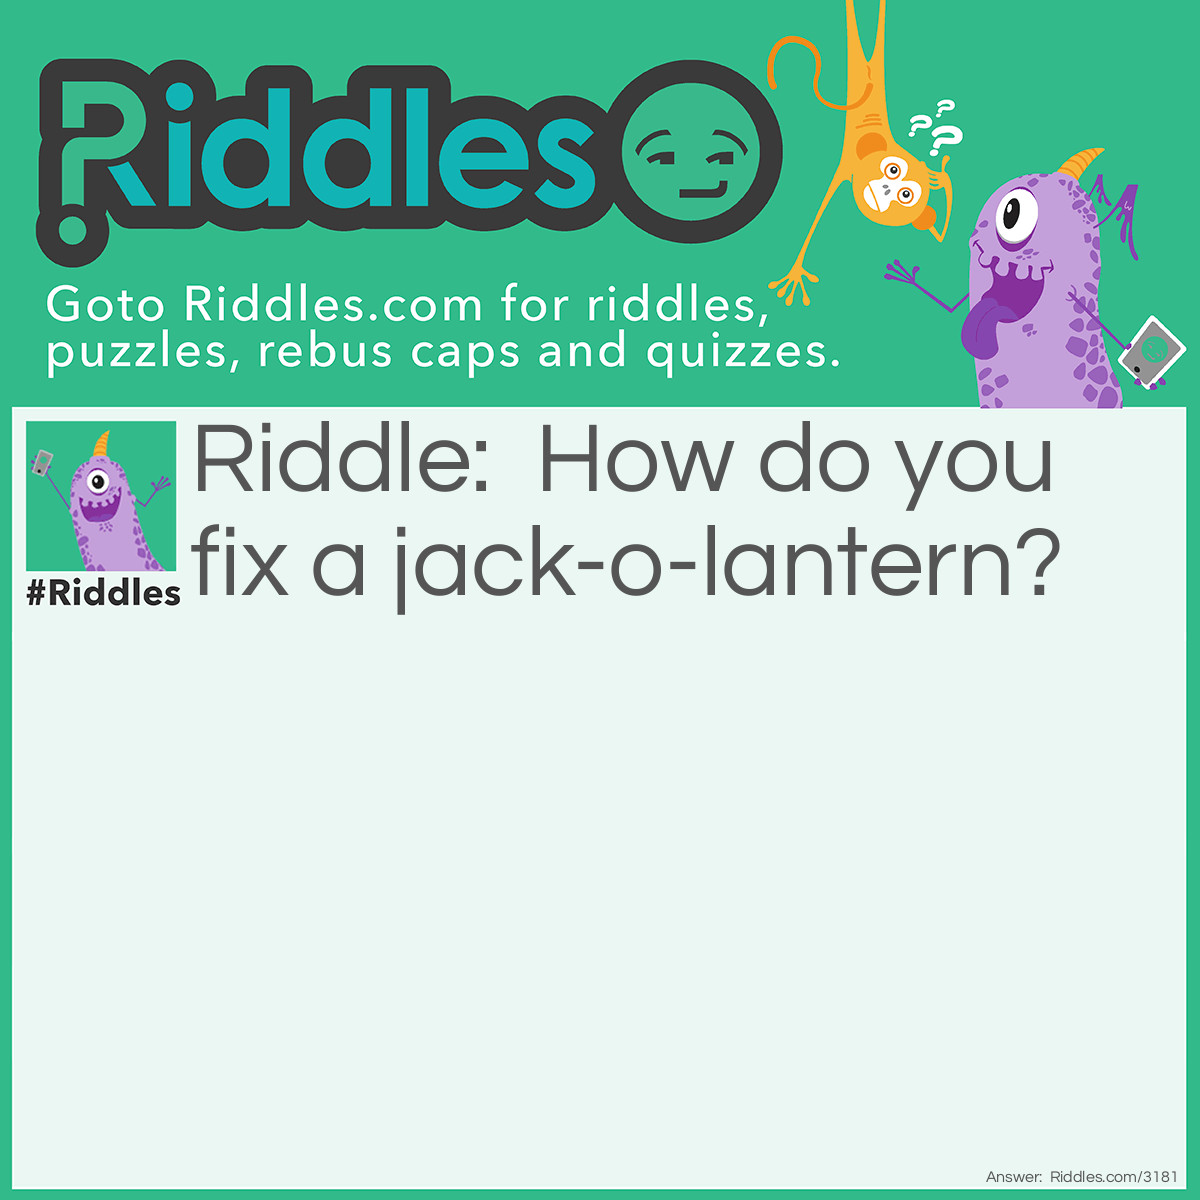 Riddle: How do you fix a jack-o-lantern? Answer: With a pumpkin patch.